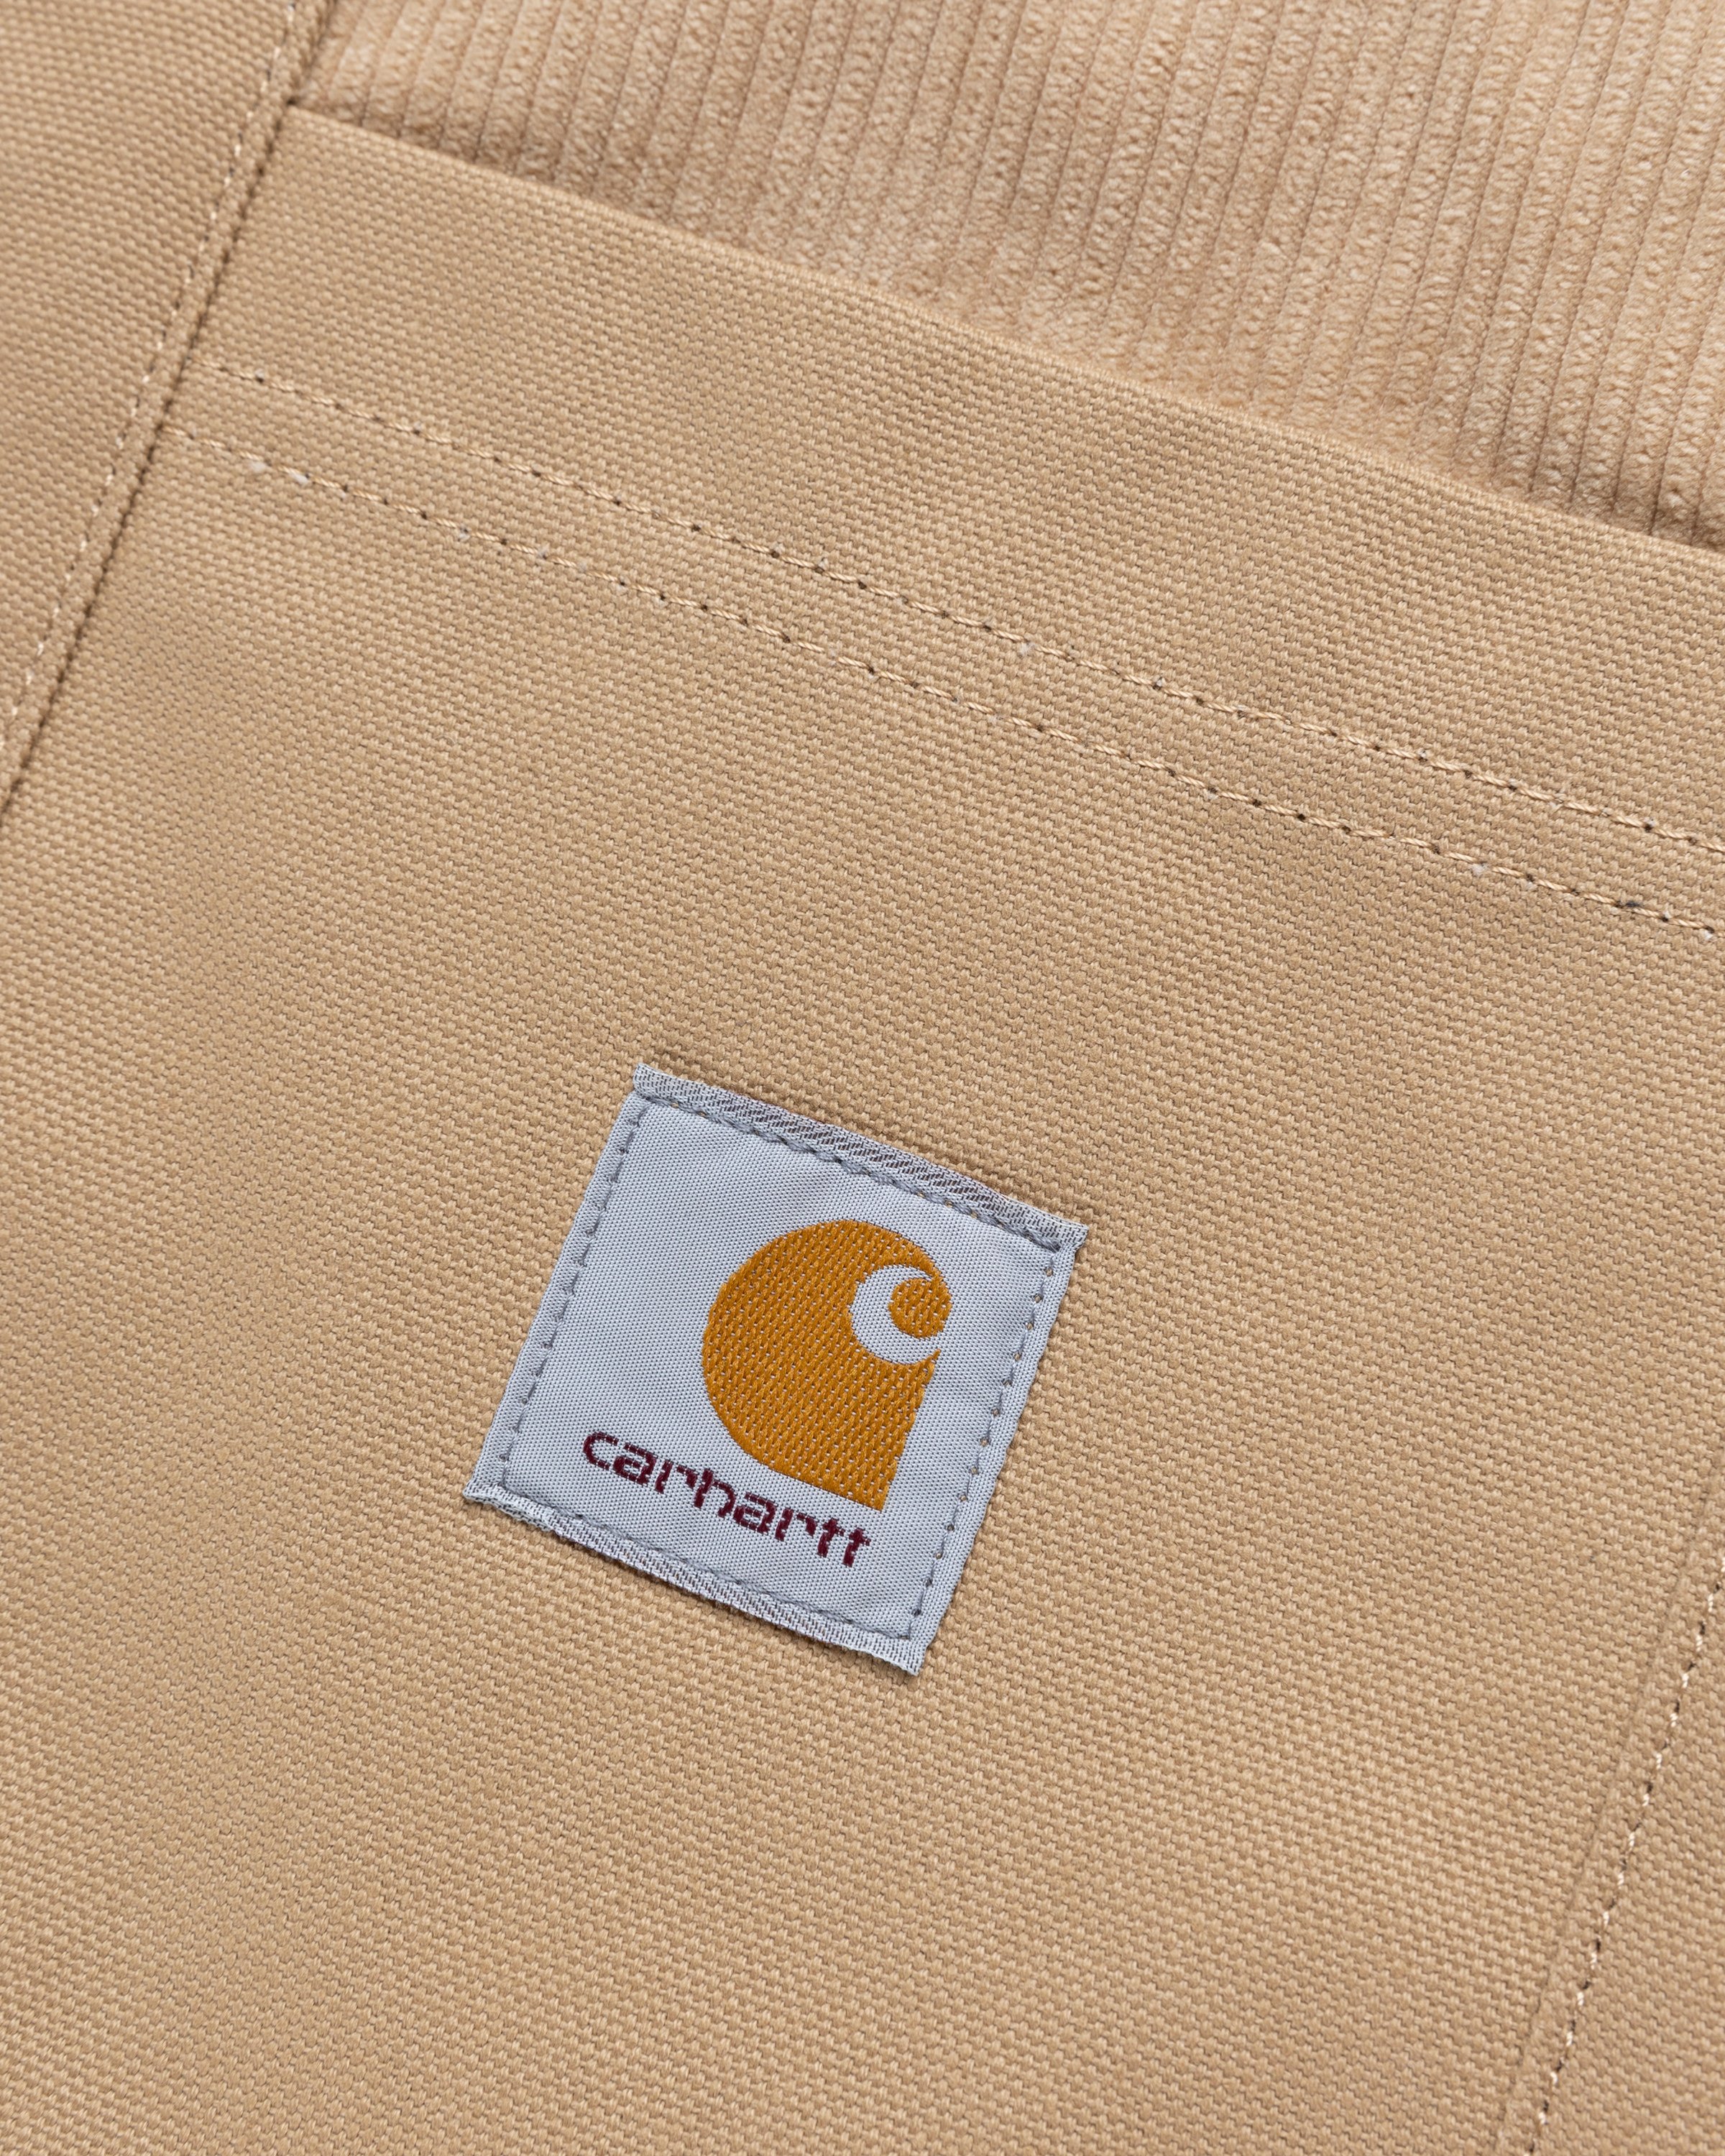 Carhartt WIP - Medley Tote Bag Dusty Hamilton Brown - Accessories - Brown - Image 6